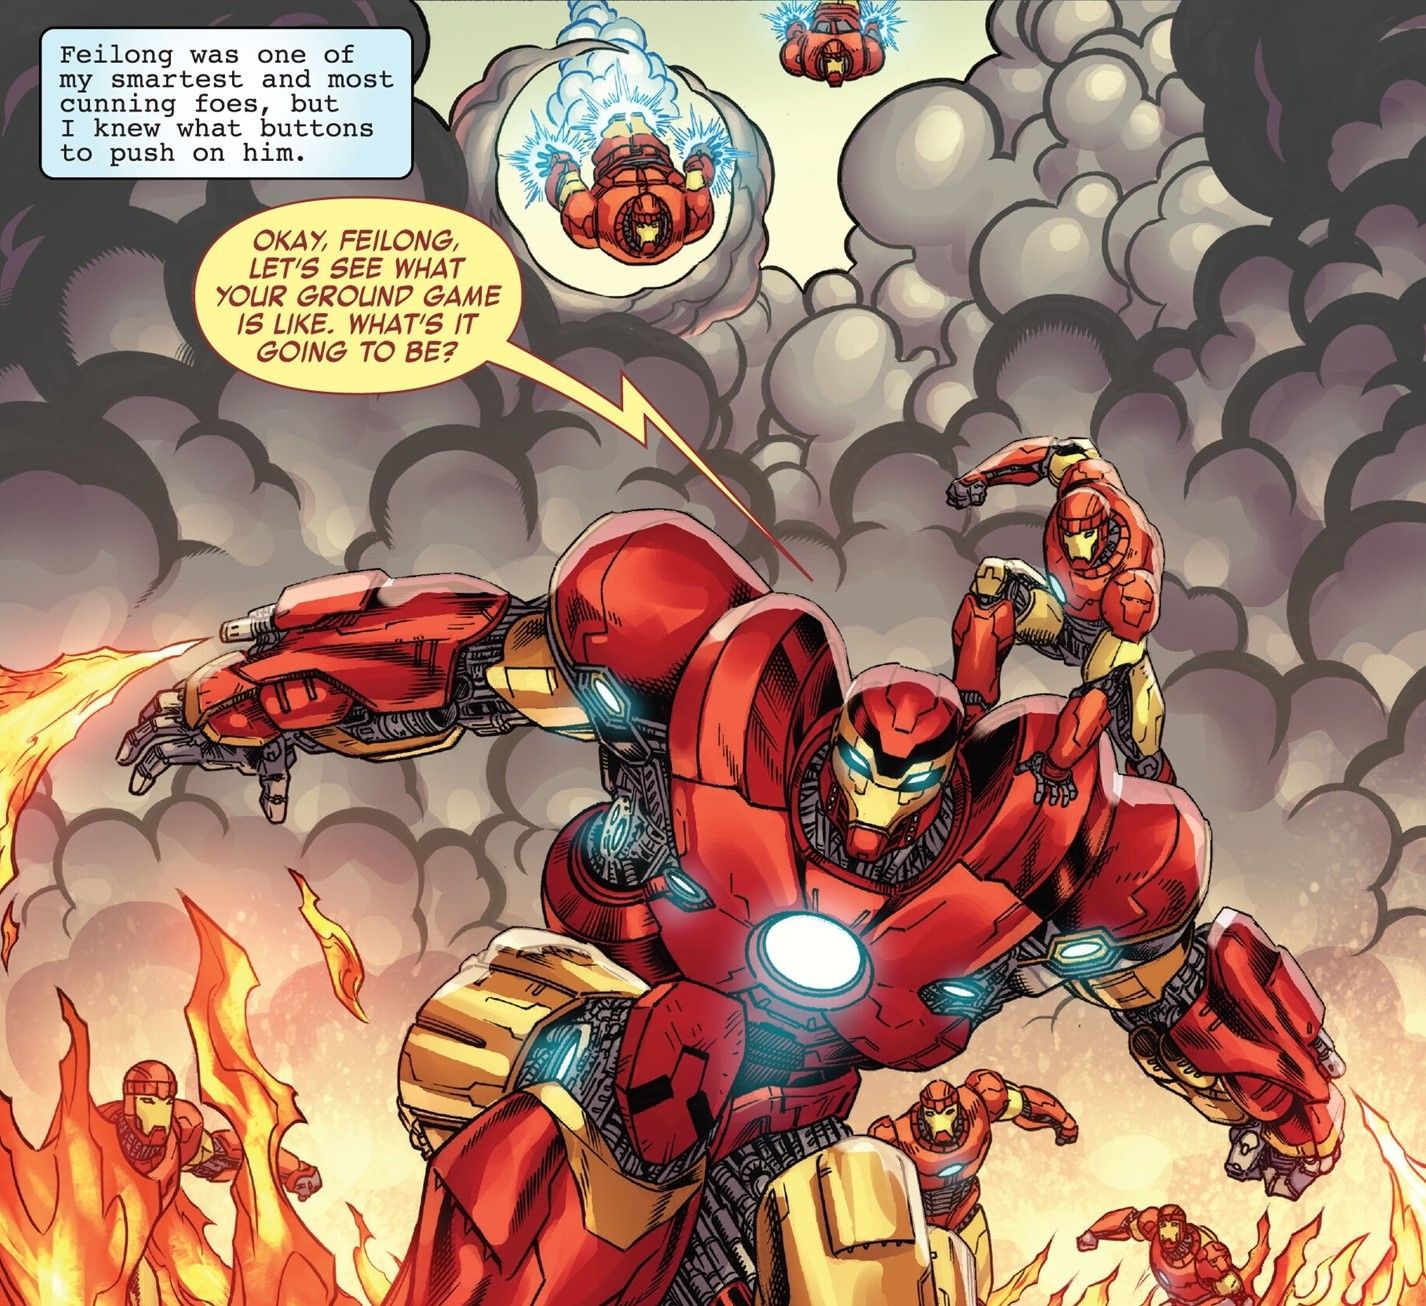 The massive Sentinel Buster is under siege by Iron Man Sentinels